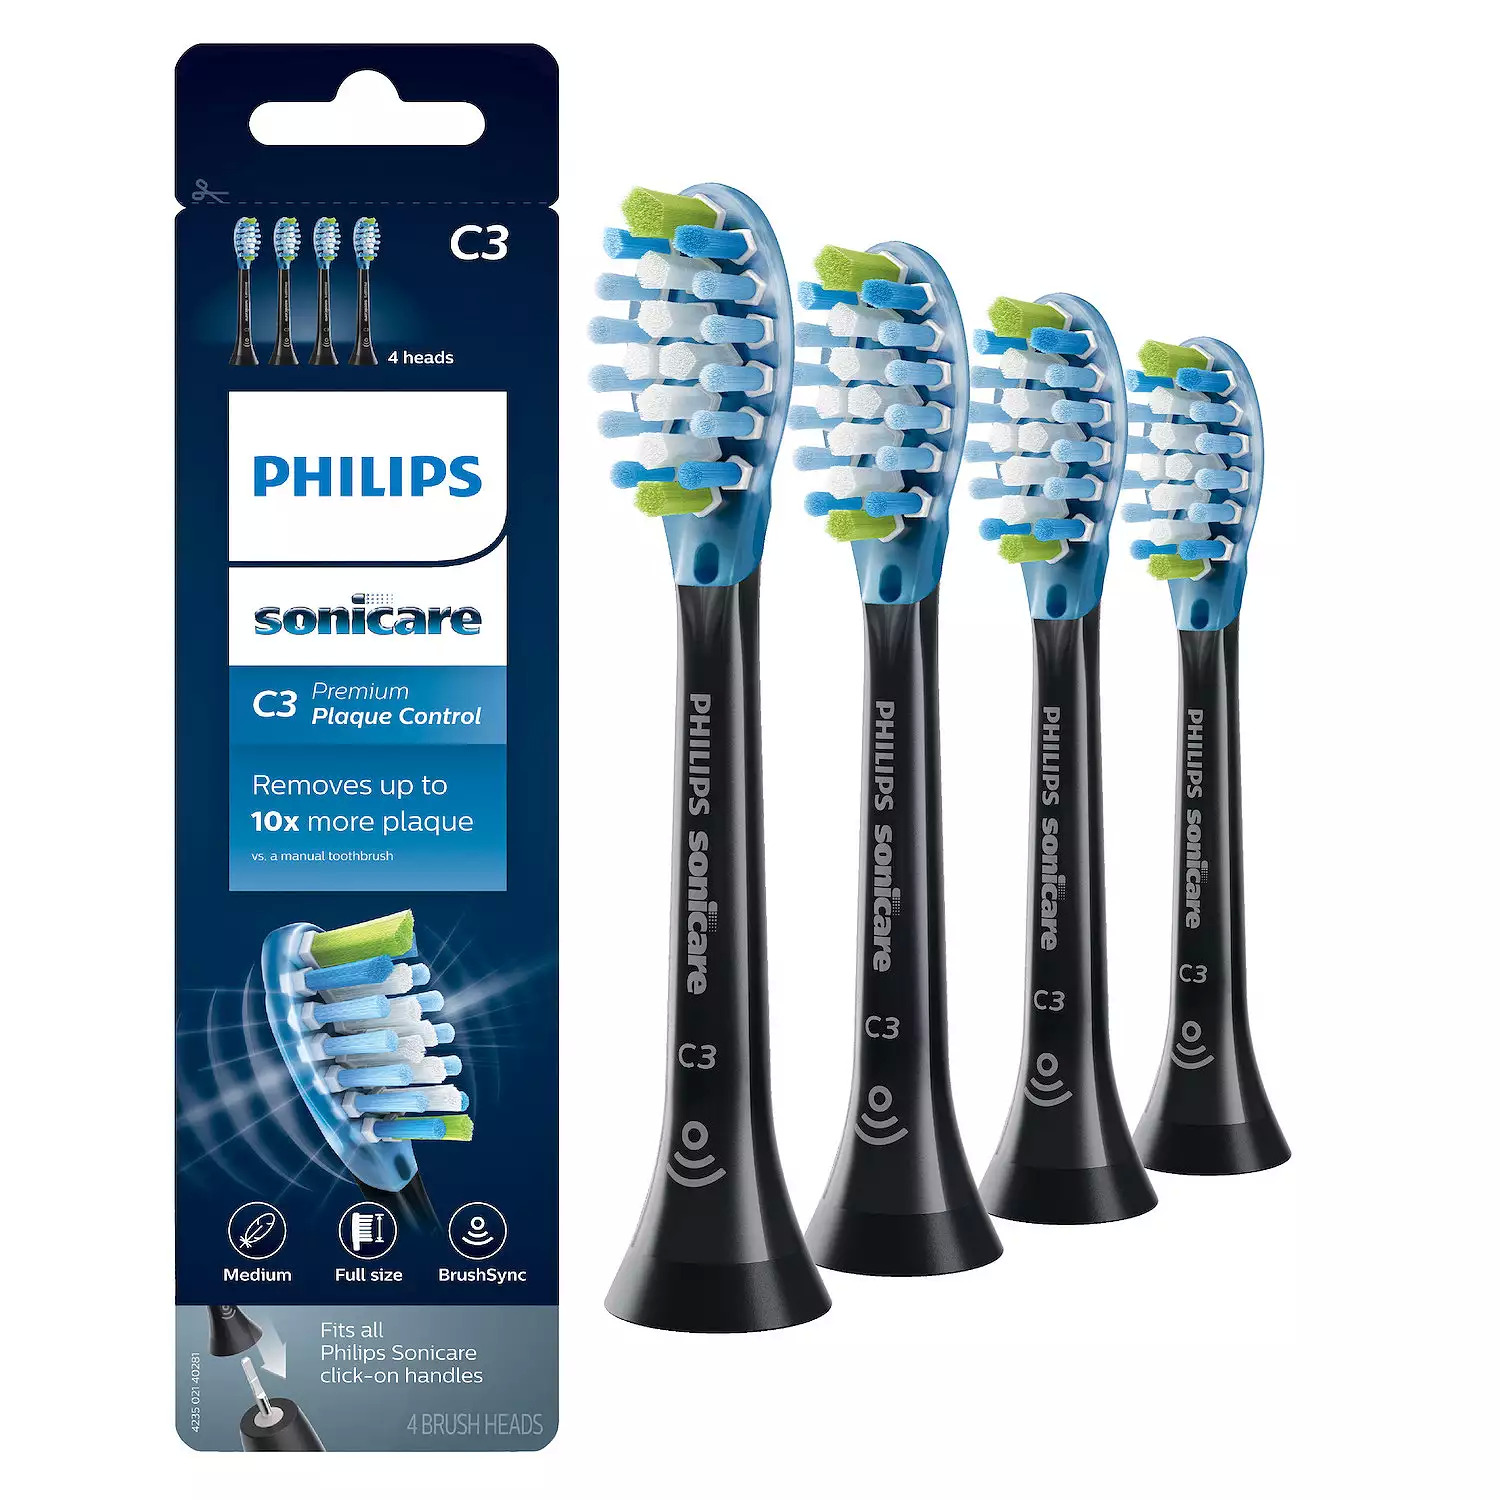 Philips Sonicare C3 Premium Plaque Control 4-Pack Smart Replacement Toothbrush Heads - $13